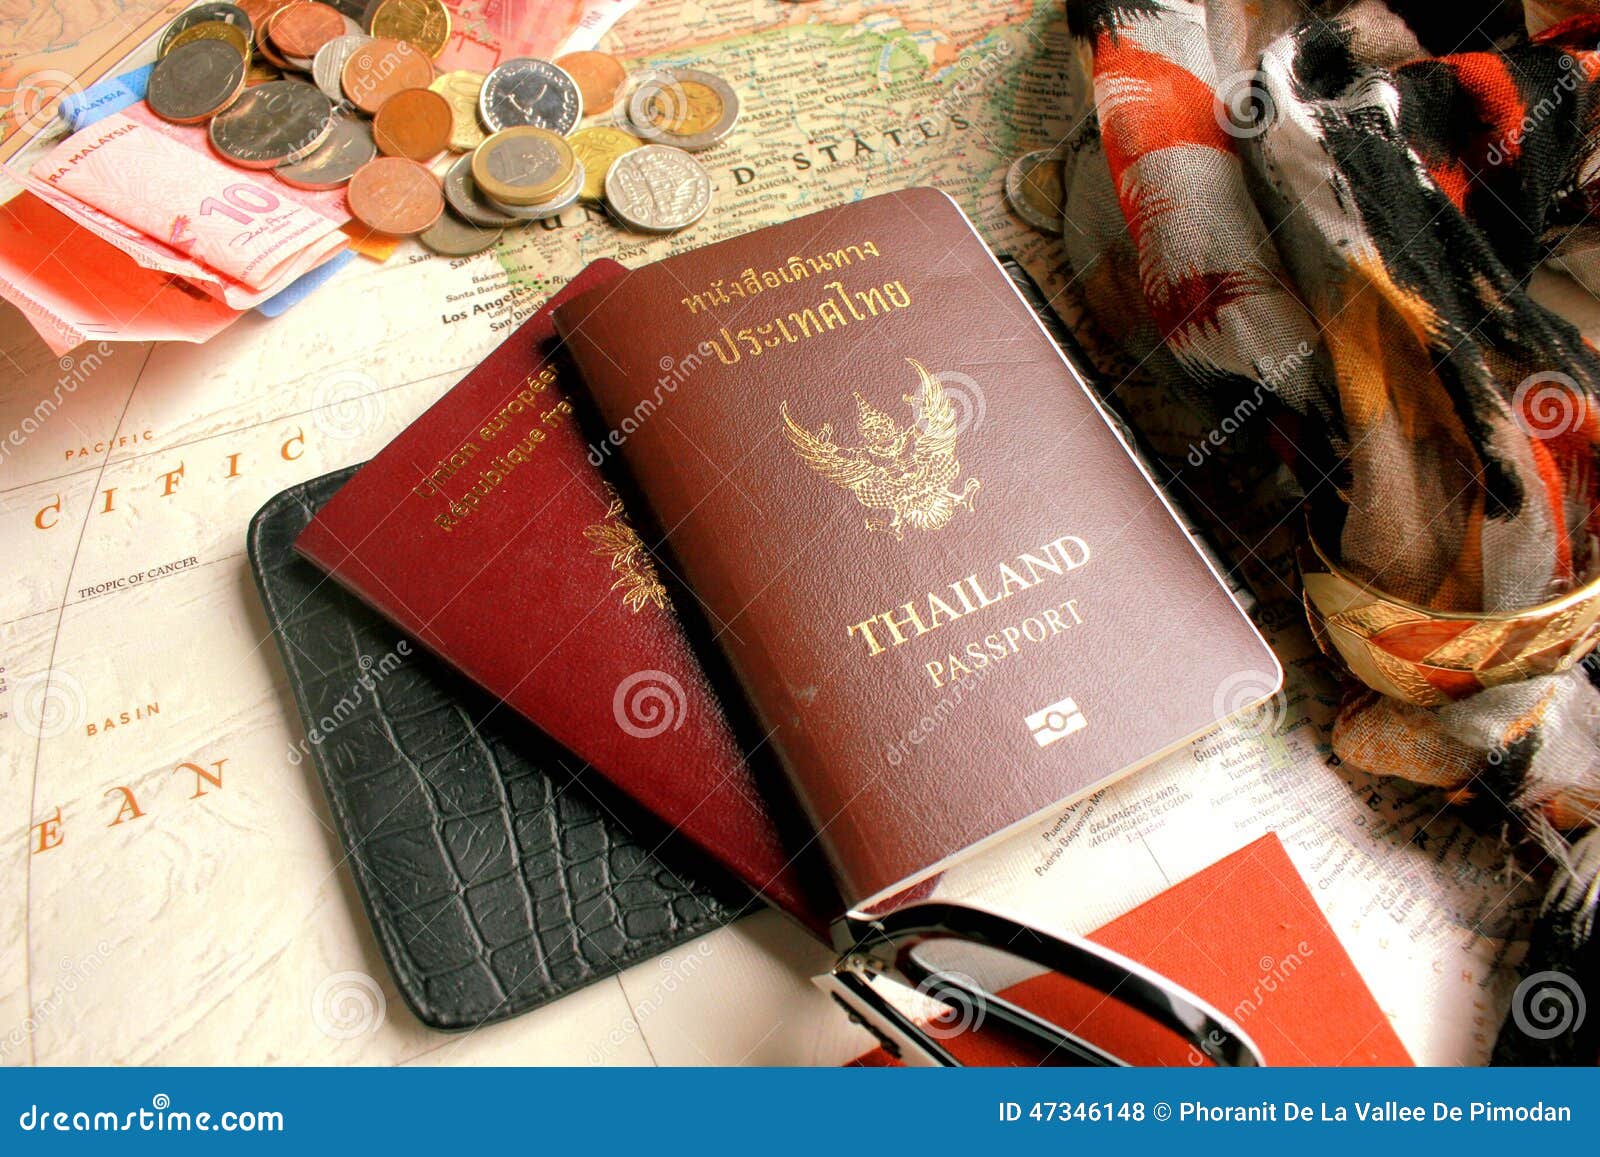 pasport with the s of thailand and republique francaise and some coins on world map.